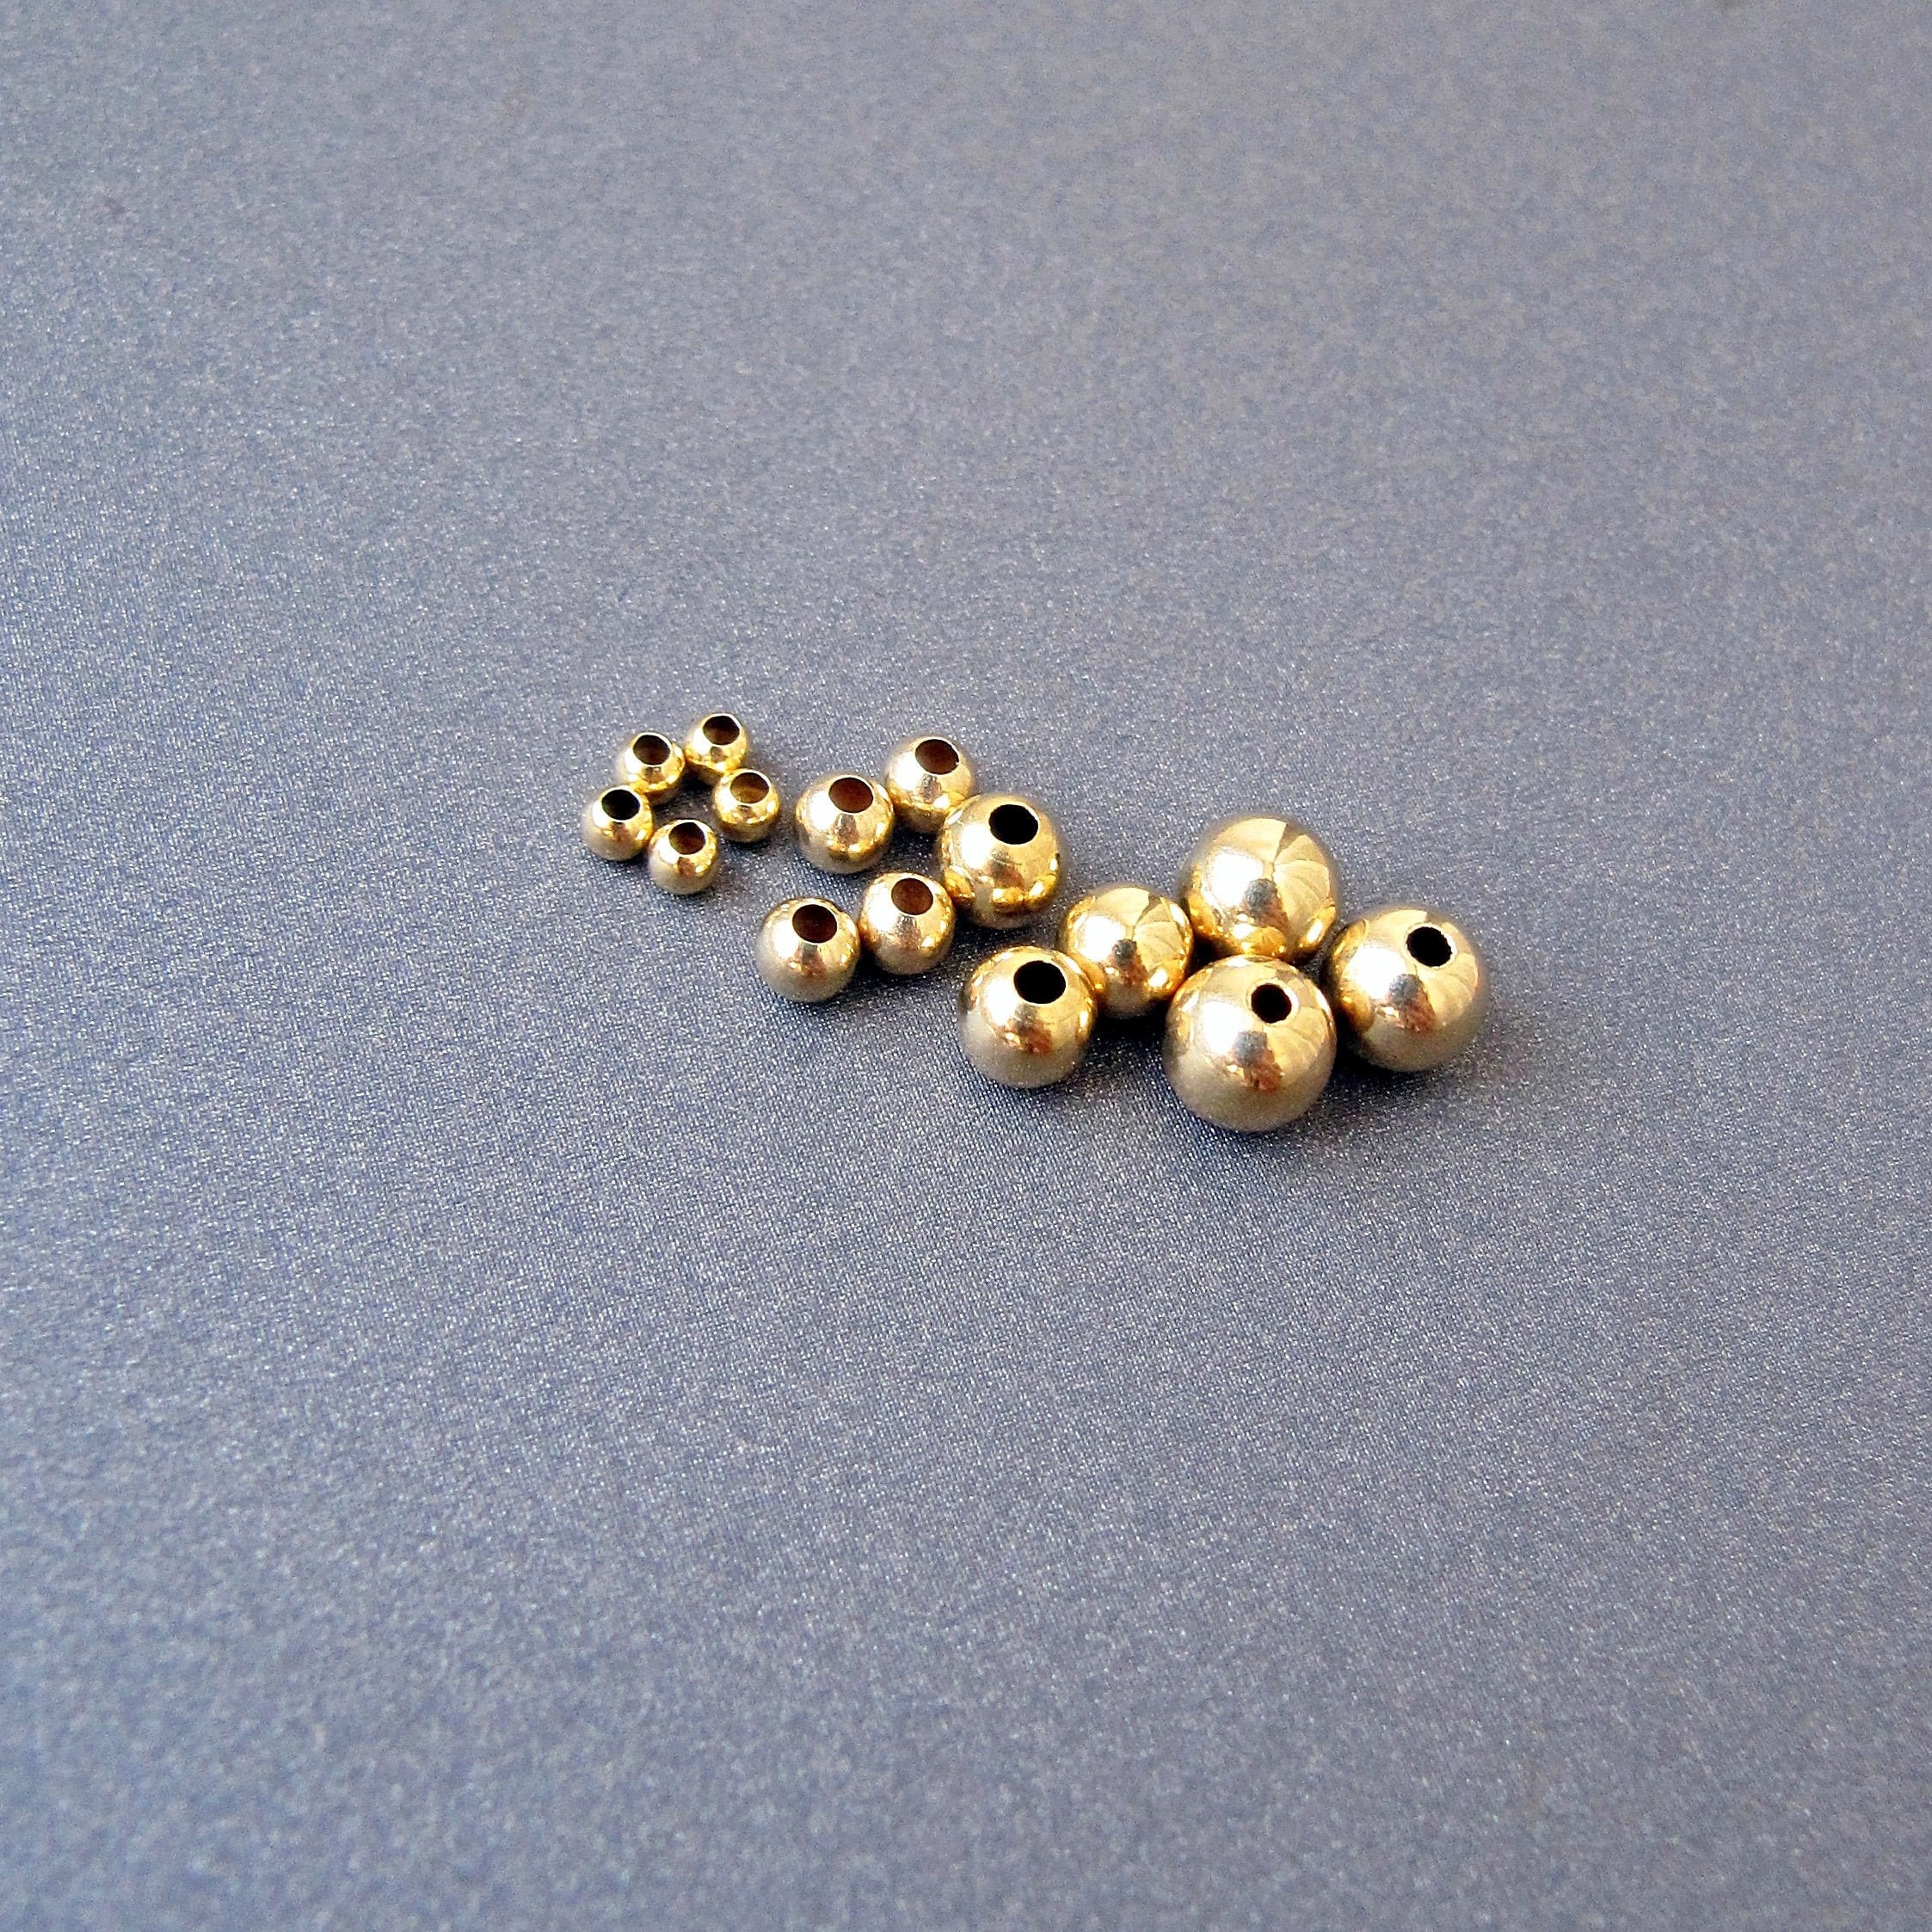 8mm Solid Brass Bead pack, 50 Beads, Vintage, Large Hole, 14  strand,  Handmade. Native American, Tribal, French Style beads